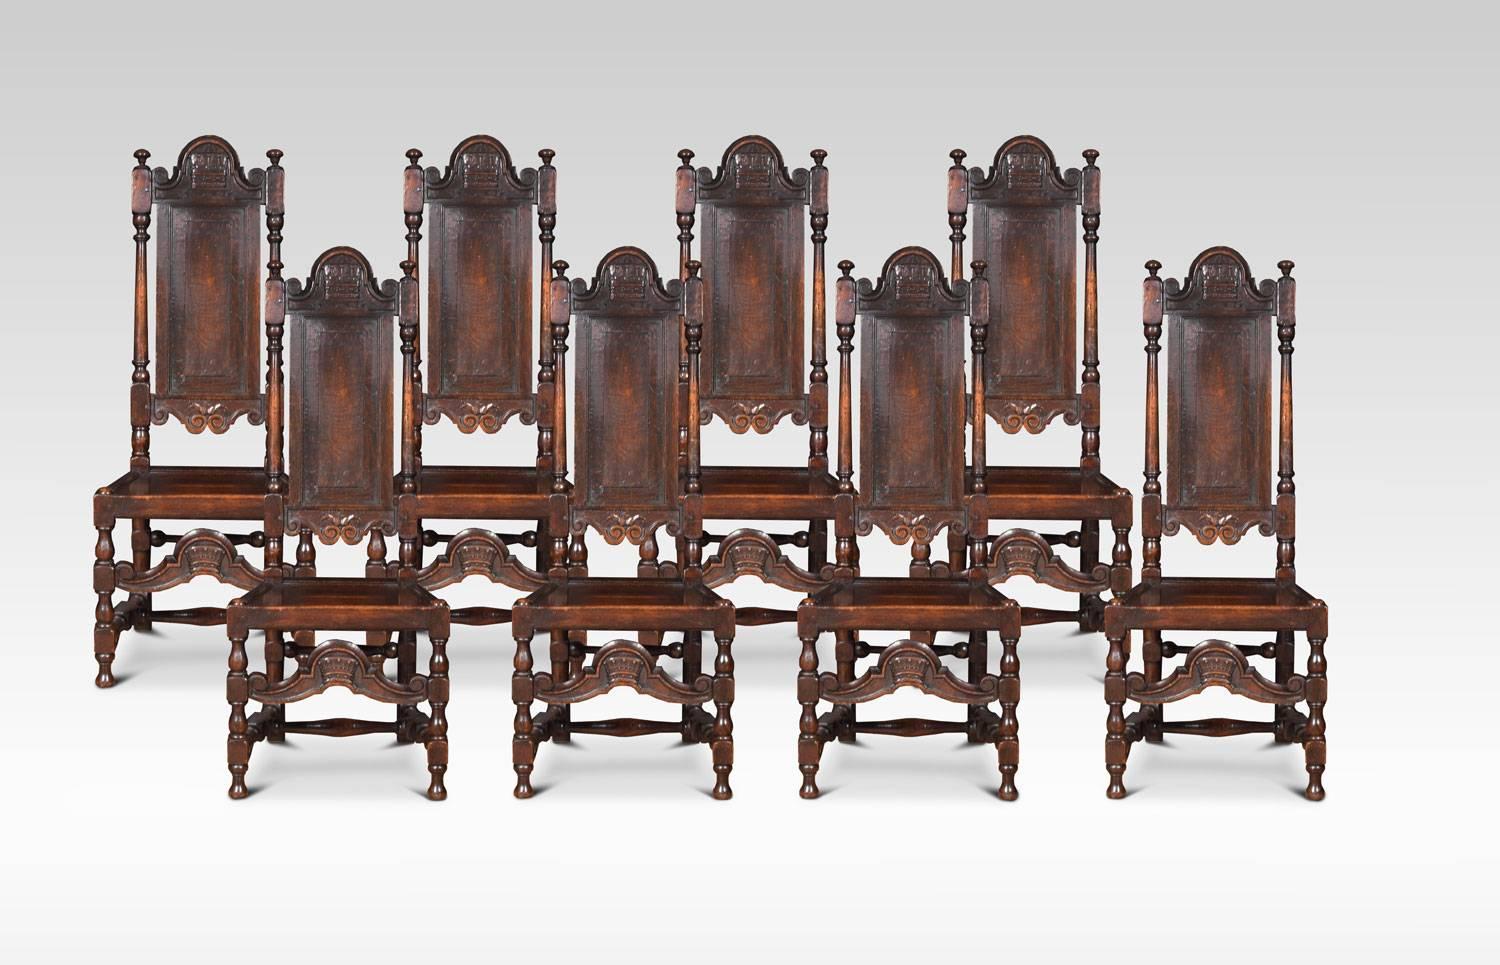 Set of ten 19th century oak chairs in the William and Mary style, consisting of two Carver armchairs, and eight side chairs, all having arched cresting rails with carved crowns. To the fielded panelled backs flanked by turned supports. The solid oak